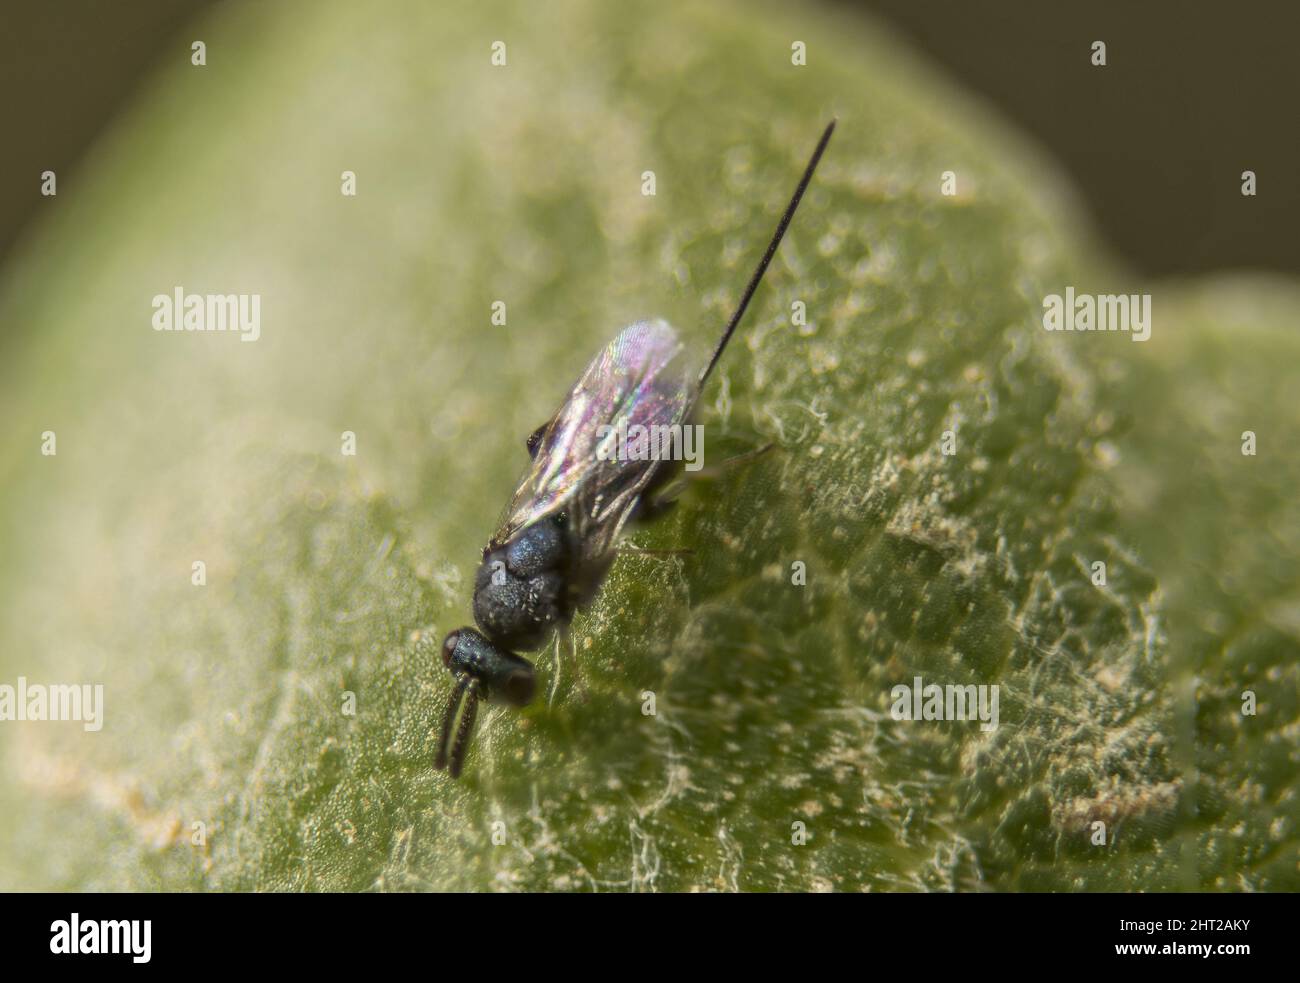 Closeup shot of a Torymidae wasp perched on a leaf Stock Photo